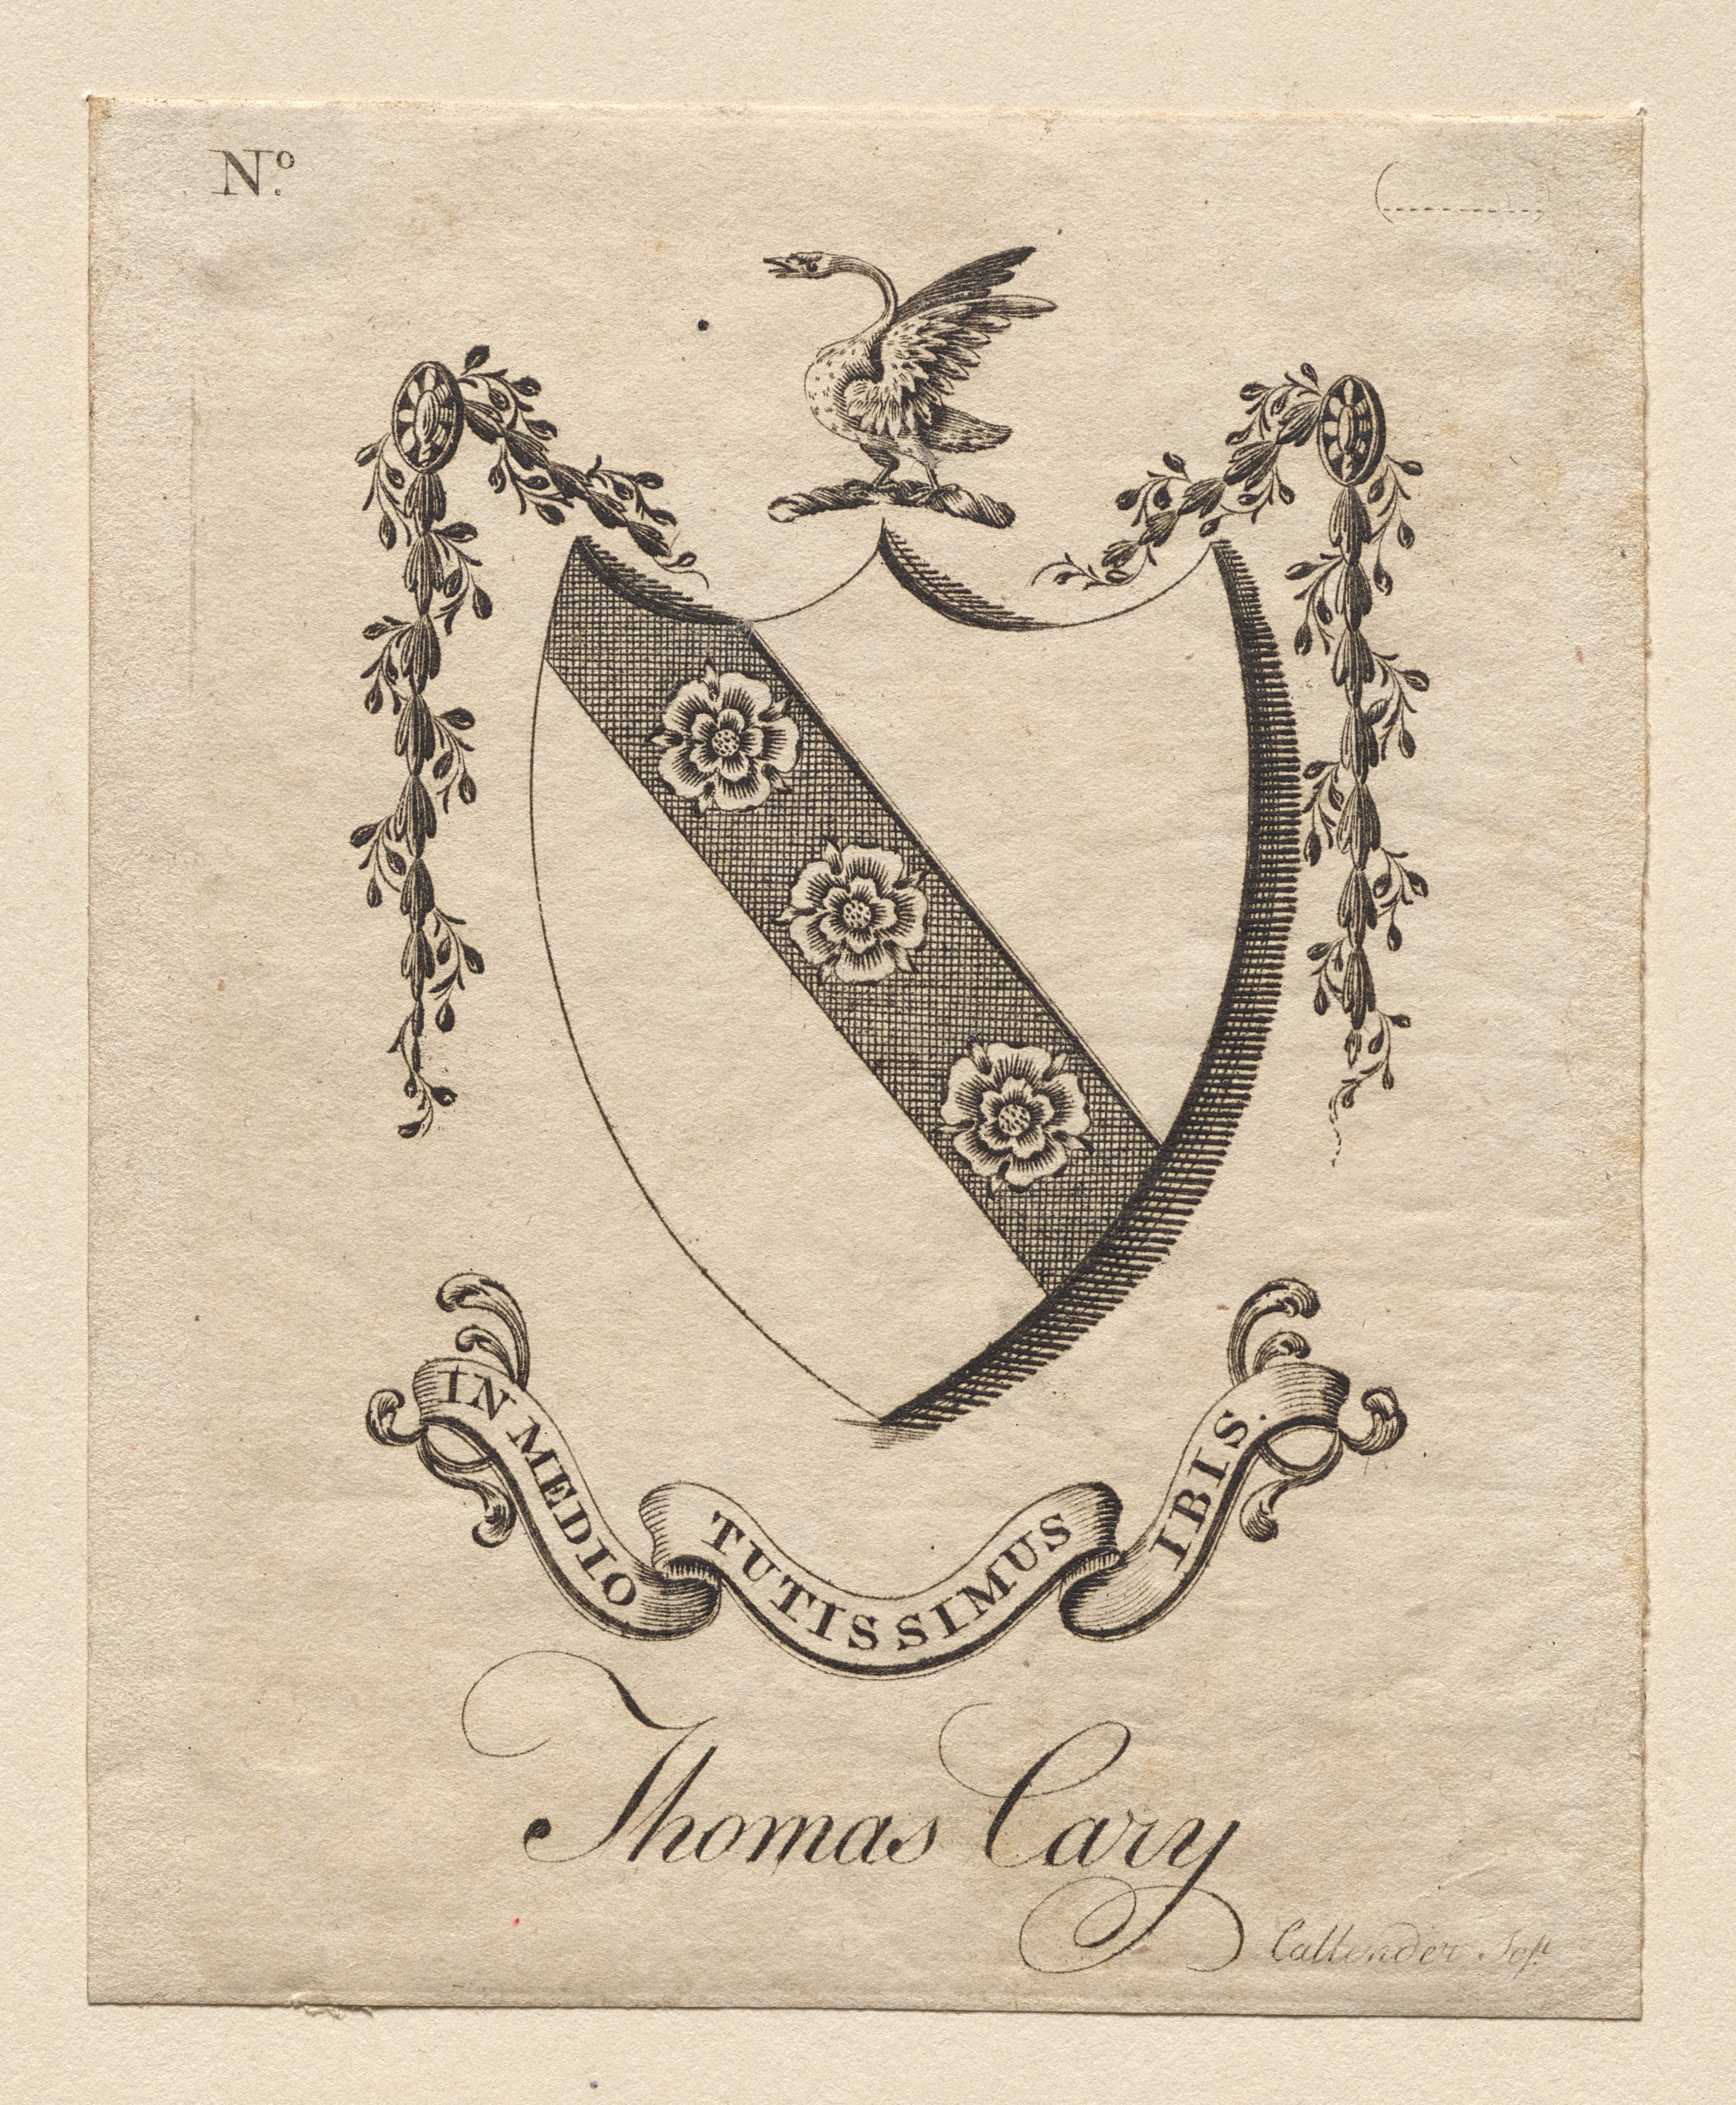 Bookplate:  Coat of Arms with Thomas Cary inscribed below